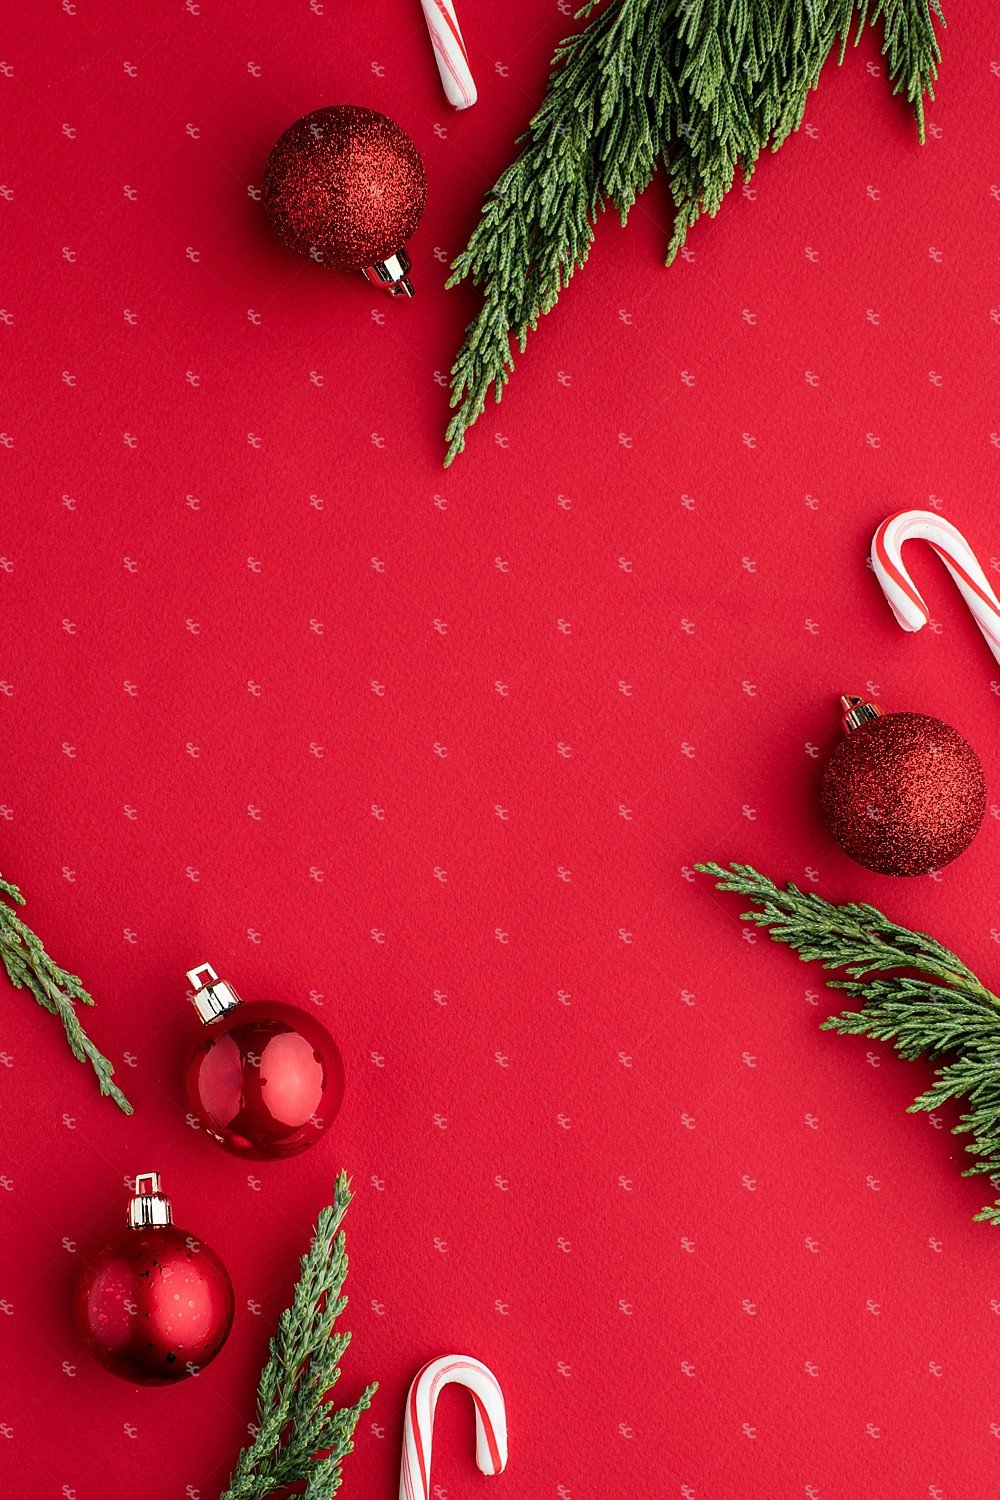 walking stick styled holiday wallpaper